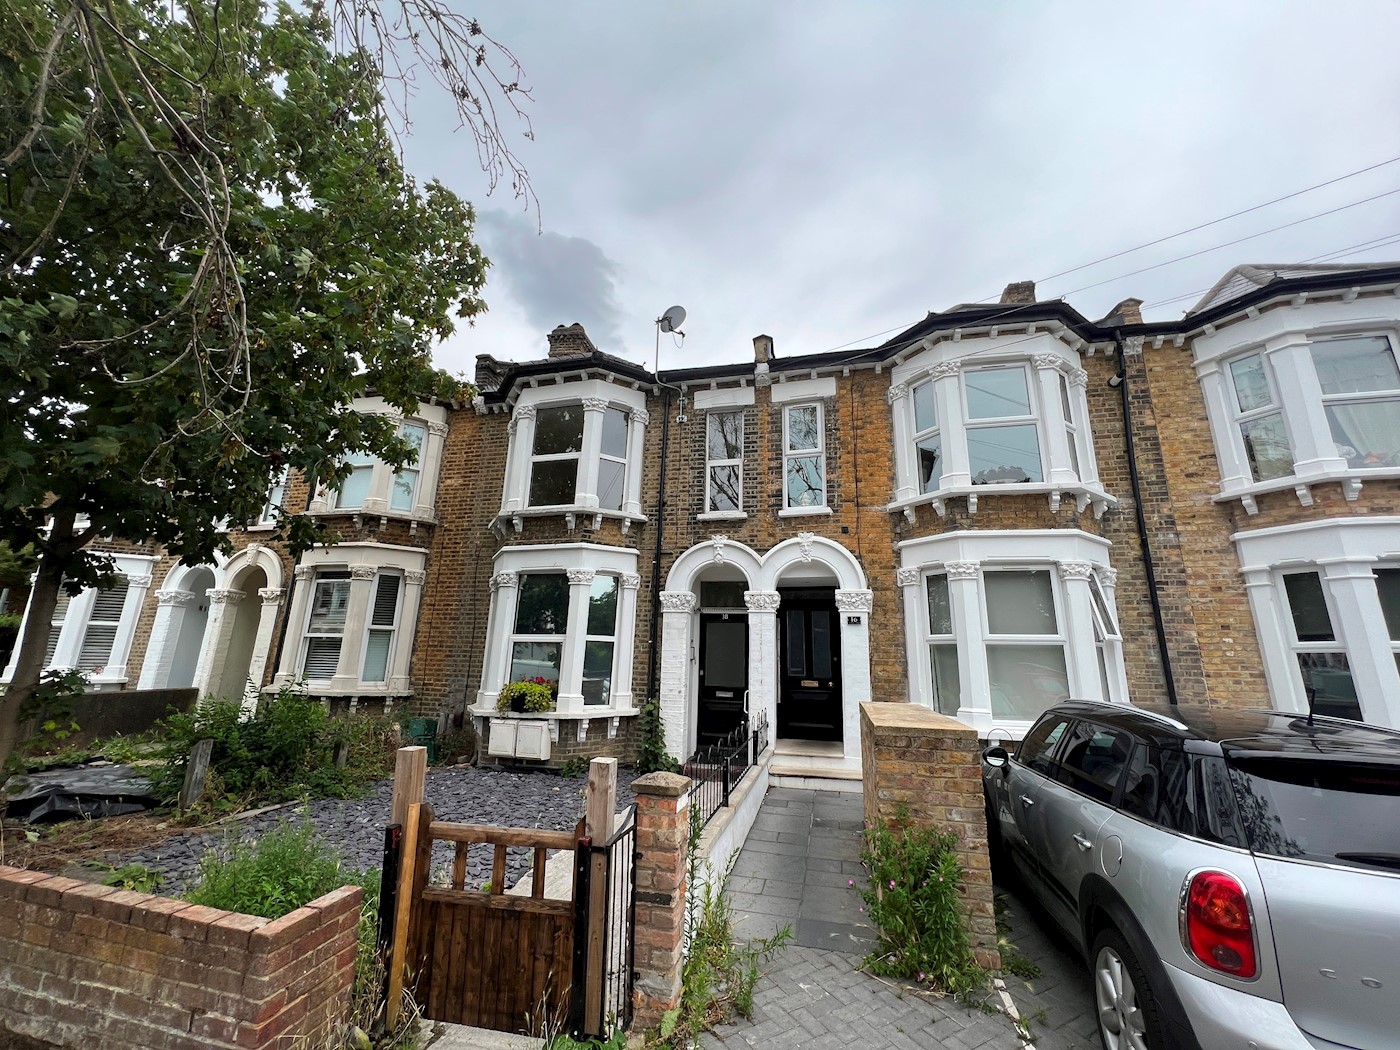 First Floor Flat, 18 St Johns Road, Anerley, SE20 7ED 1/15